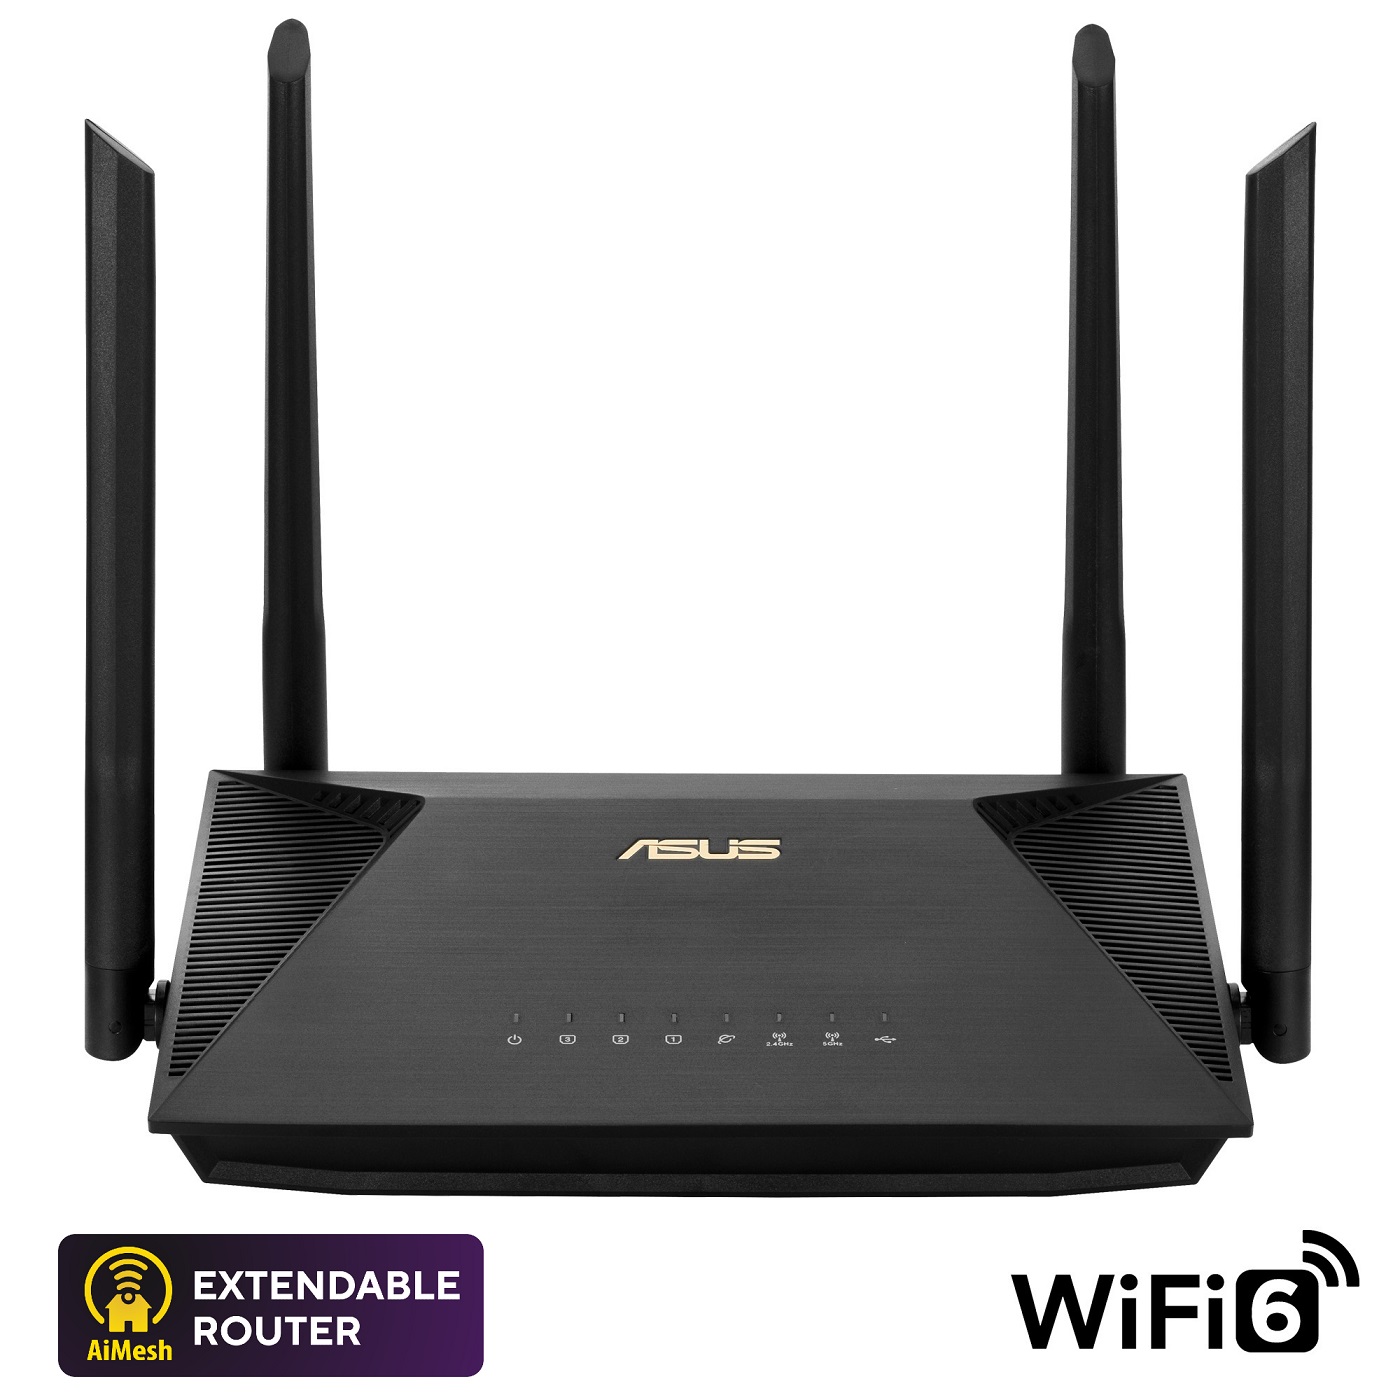 ASUS RT-AX53U (AX1800) WiFi 6 Extendable Router, 4G/5G Router replacem